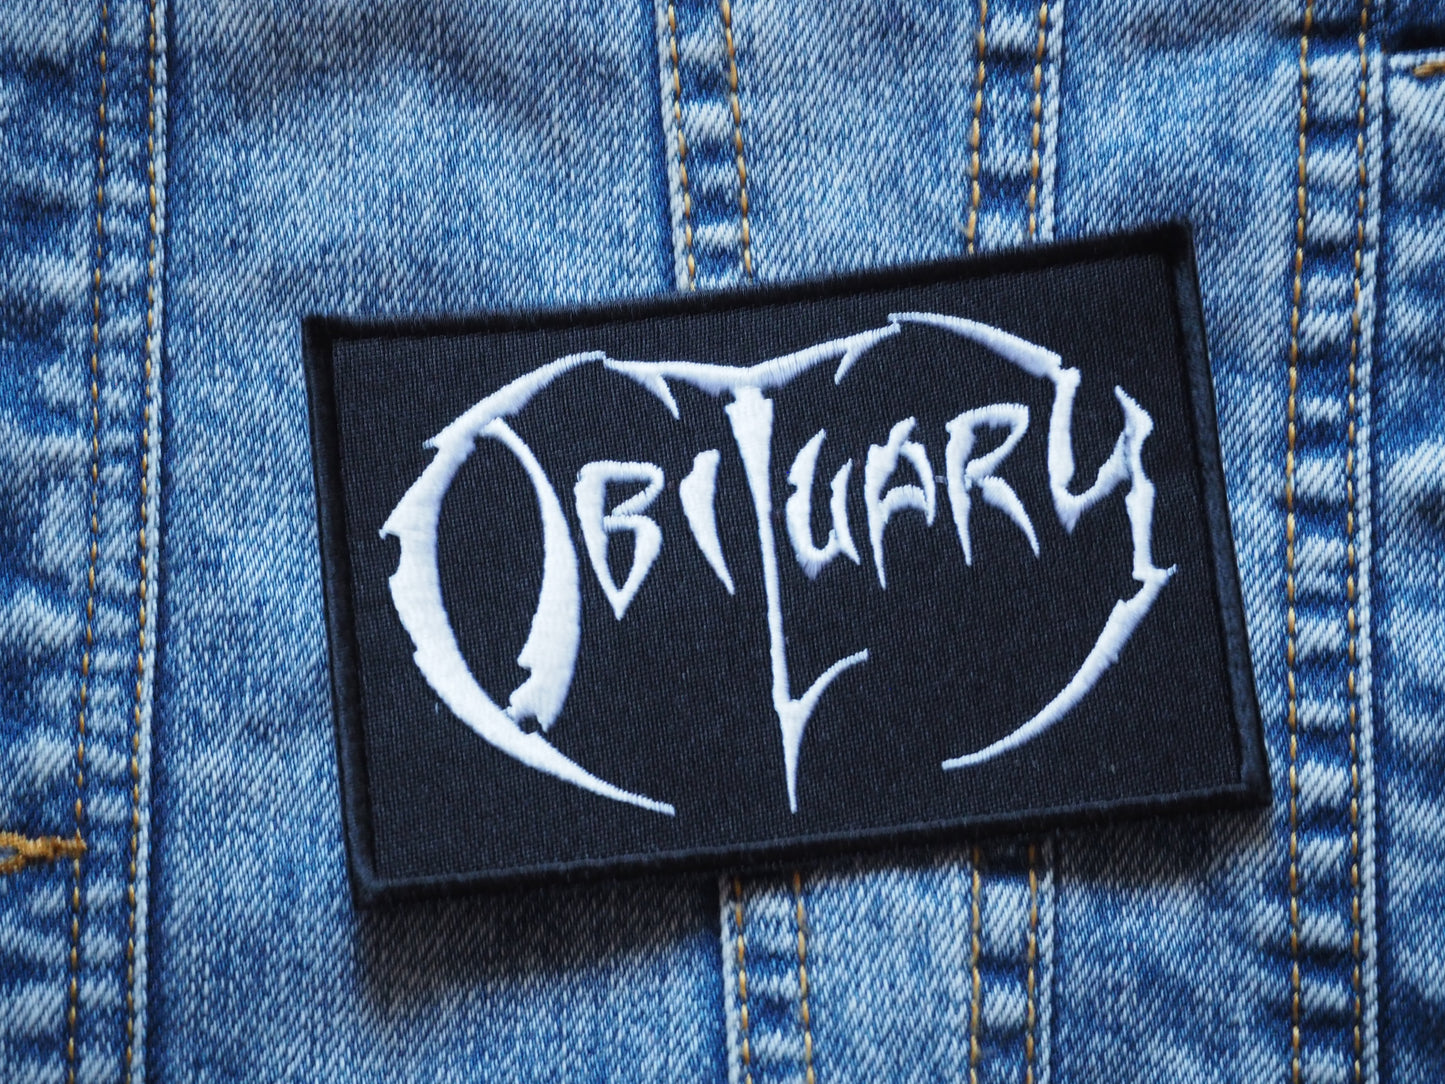 Obituary Patch Embroidered